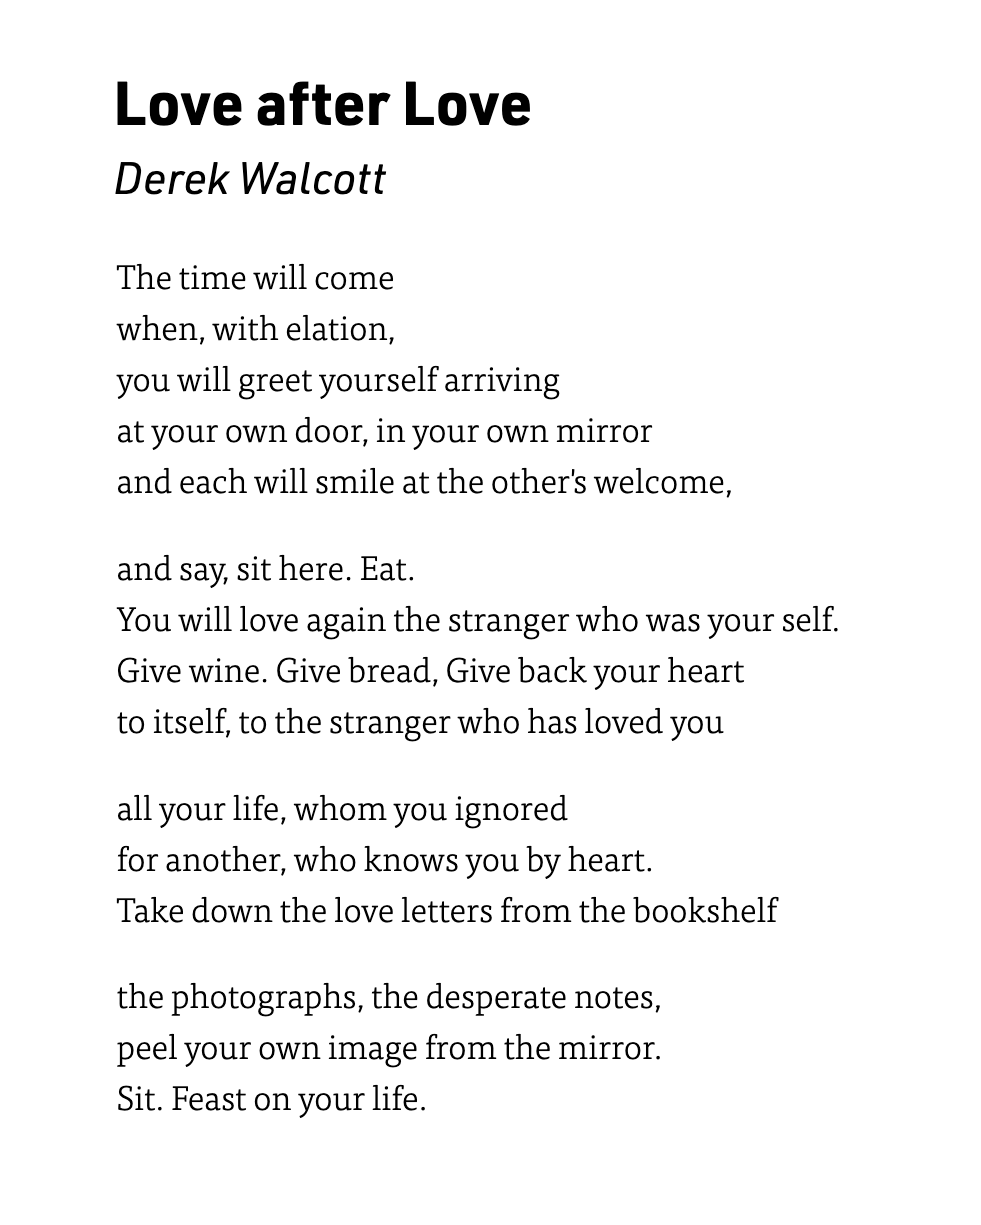 Love after Love Derek Walcott  The time will comewhen, with elation,you will greet yourself arrivingat your own door, in your own mirrorand each will smile at the other's welcome,and say, sit here. Eat.You will love again the stranger who was your self.Give wine. Give bread, Give back your heartto itself, to the stranger who has loved youall your life, whom you ignoredfor another, who knows you by heart.Take down the love letters from the bookshelfthe photographs, the desperate notes,peel your own image from the mirror.Sit. Feast on your life.